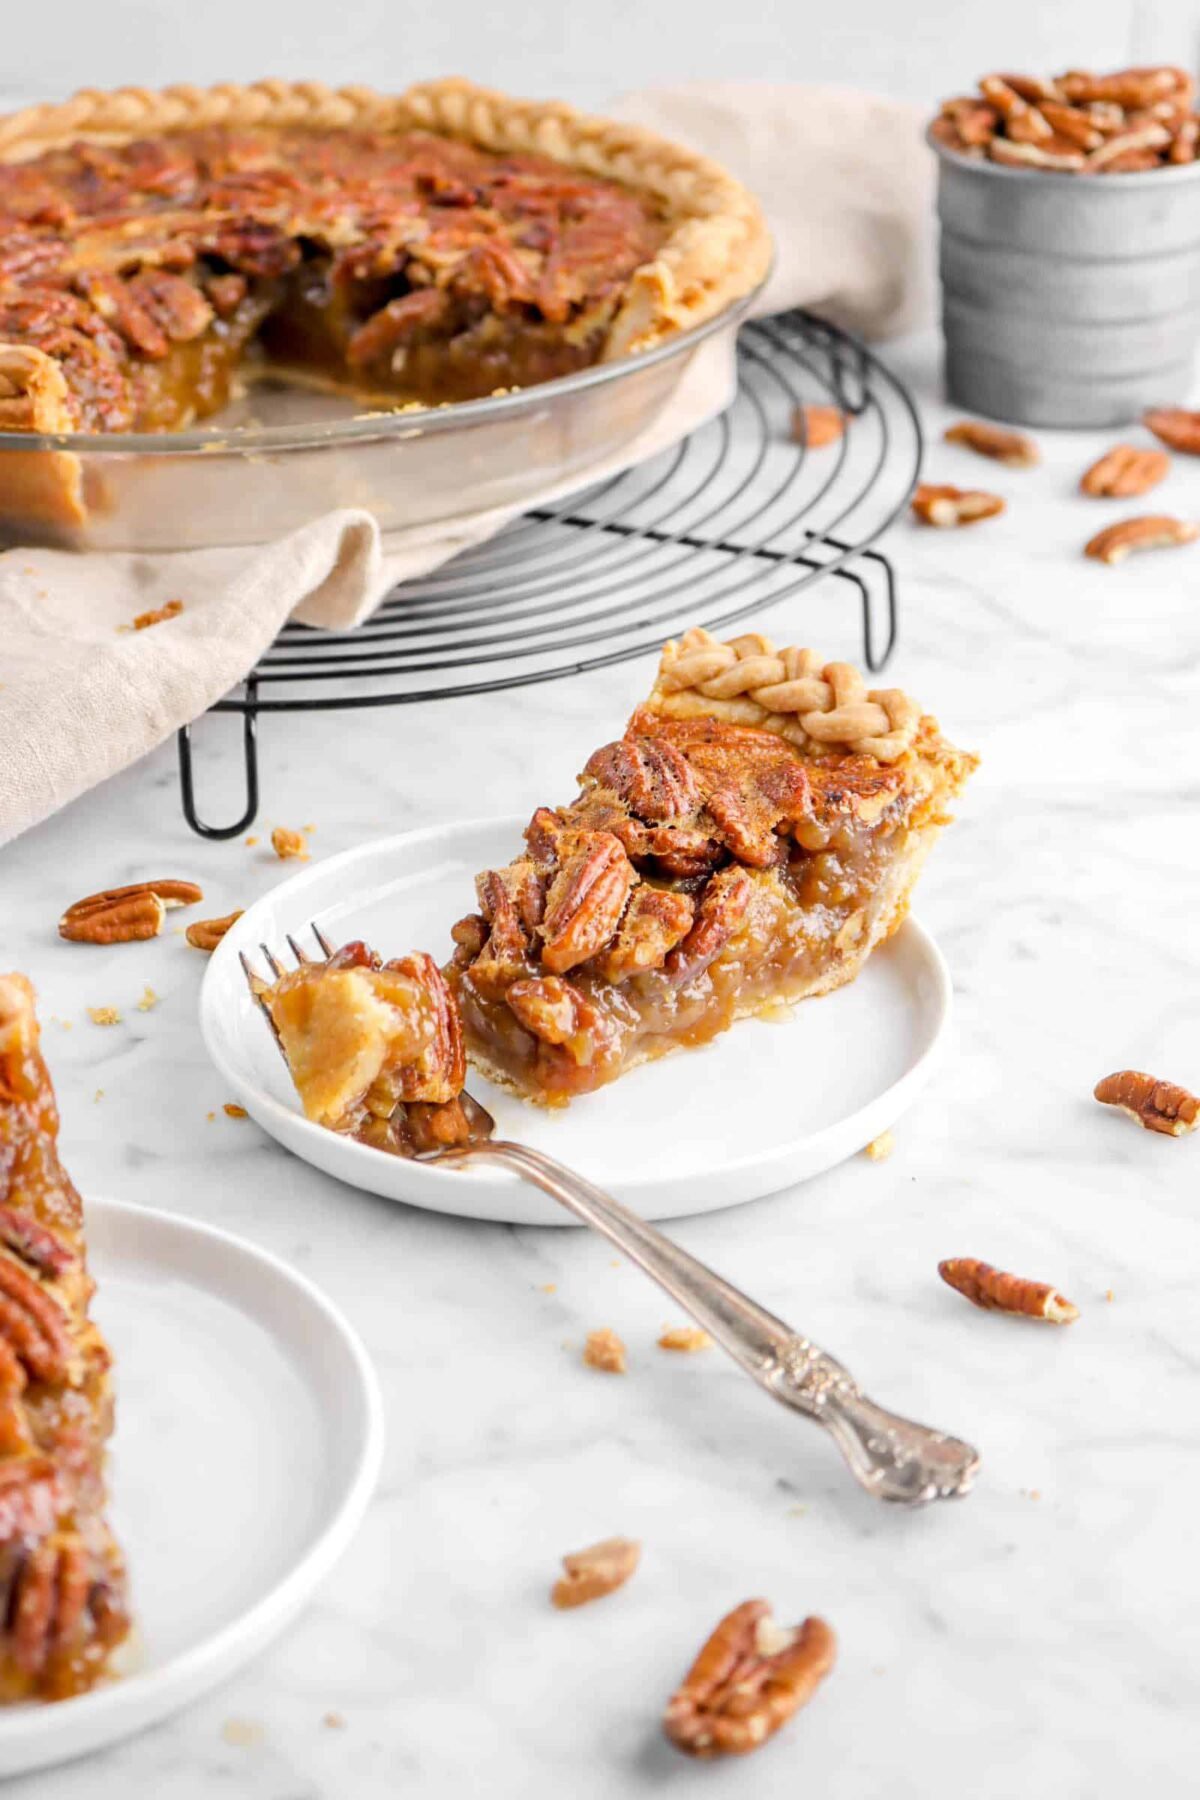 Easy Southern Pecan Pie | maryannedon | Copy Me That